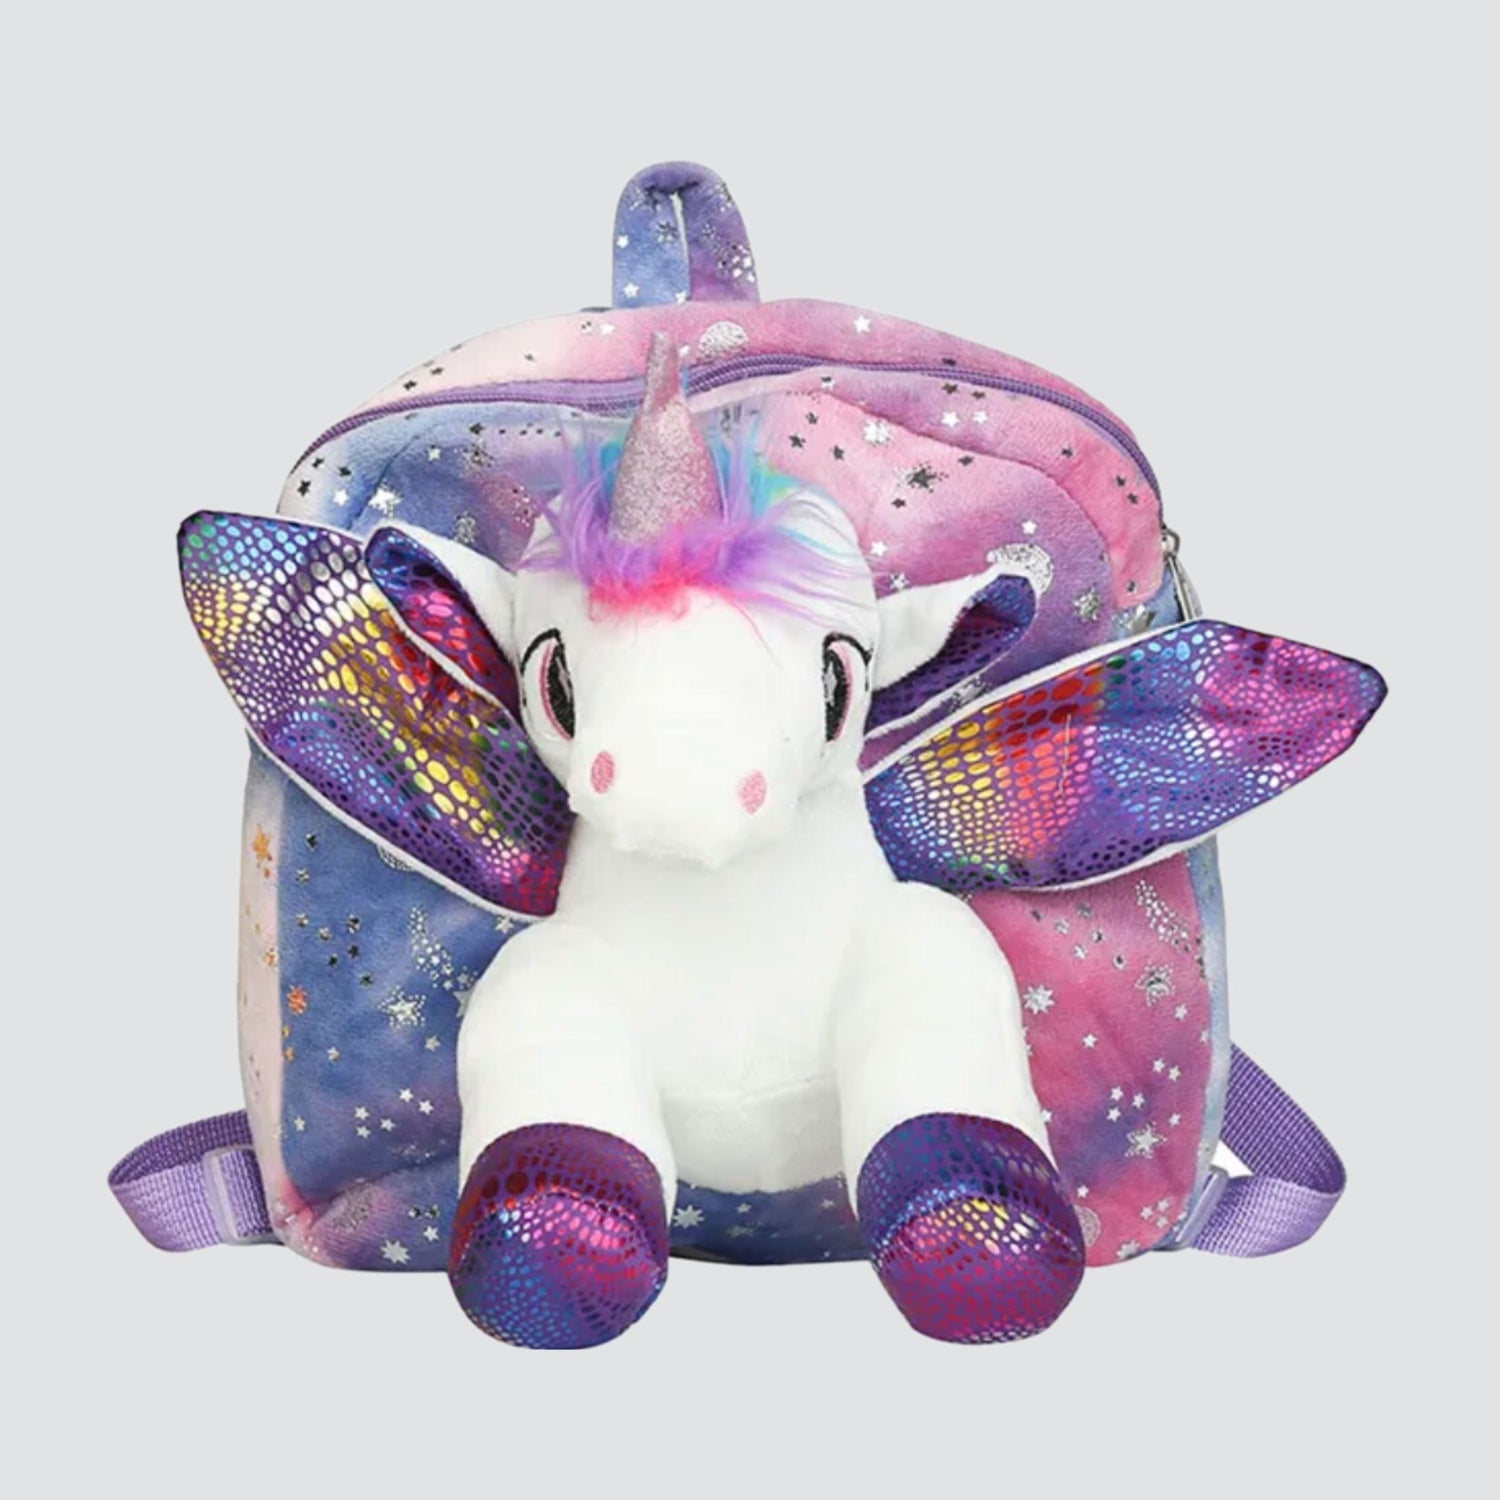 Purple Unicorn Backpack with Silver Star Details.